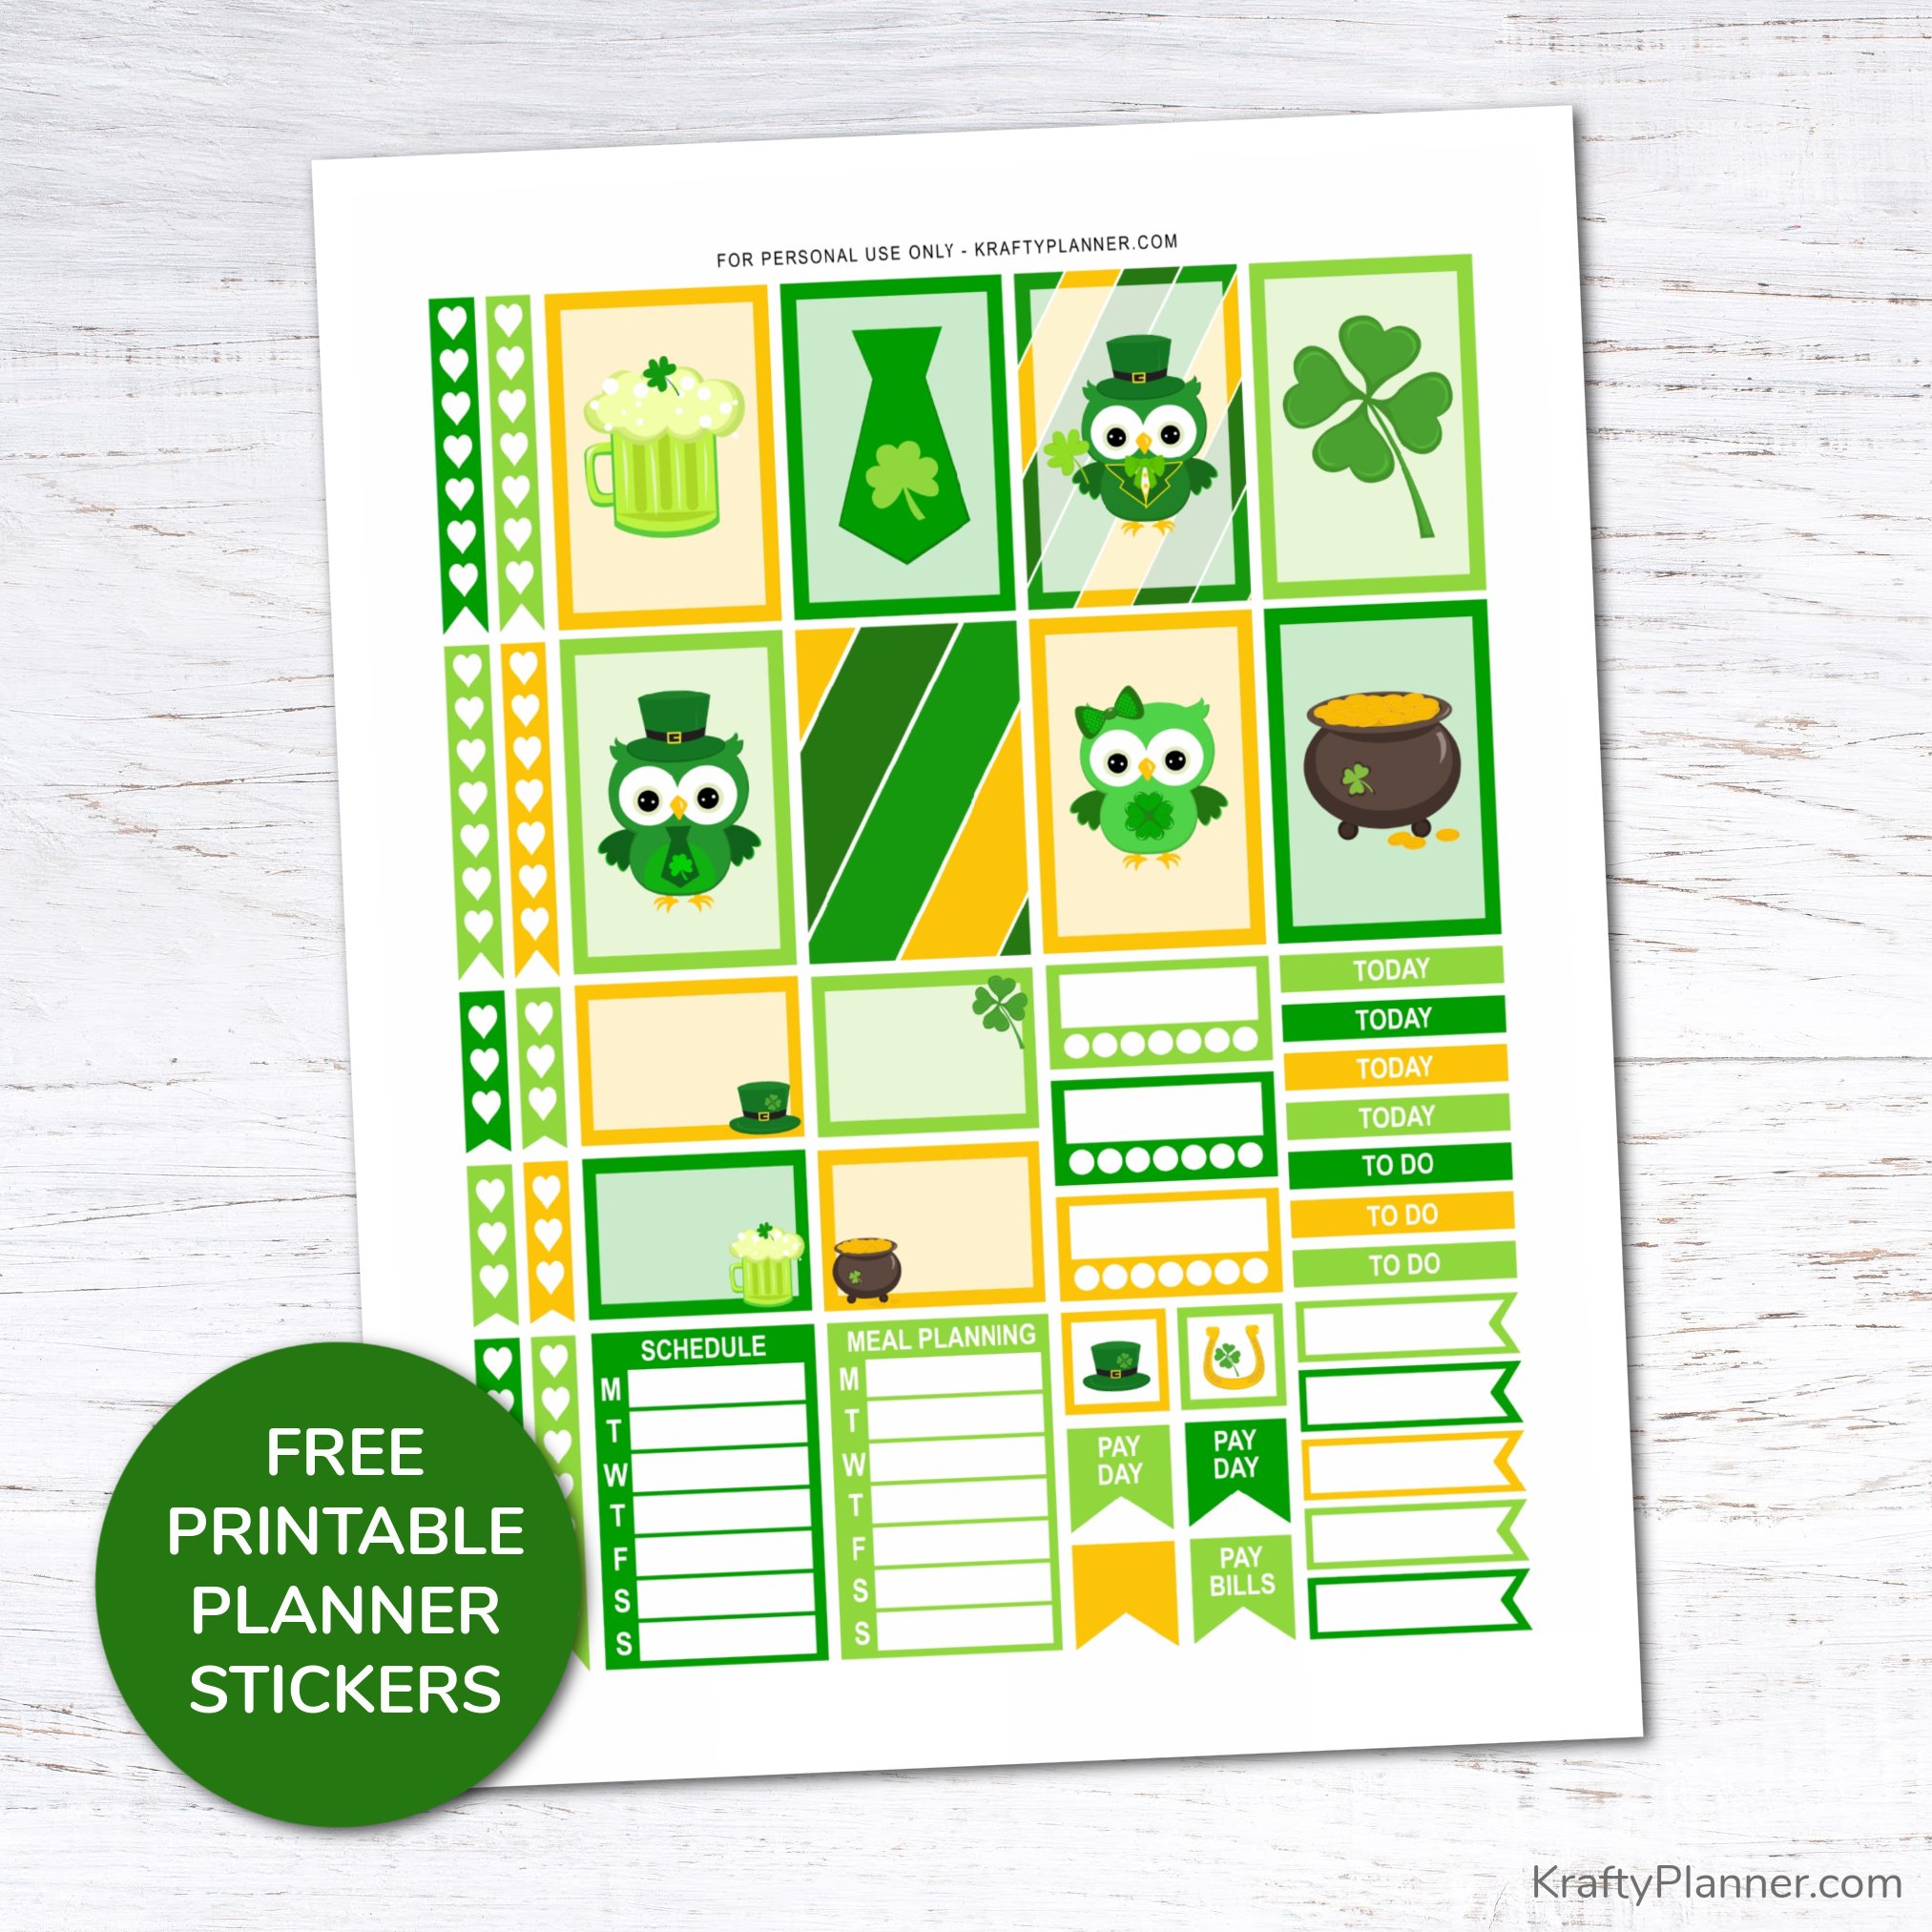 Free Printable St. Patrick's Day Planner Stickers